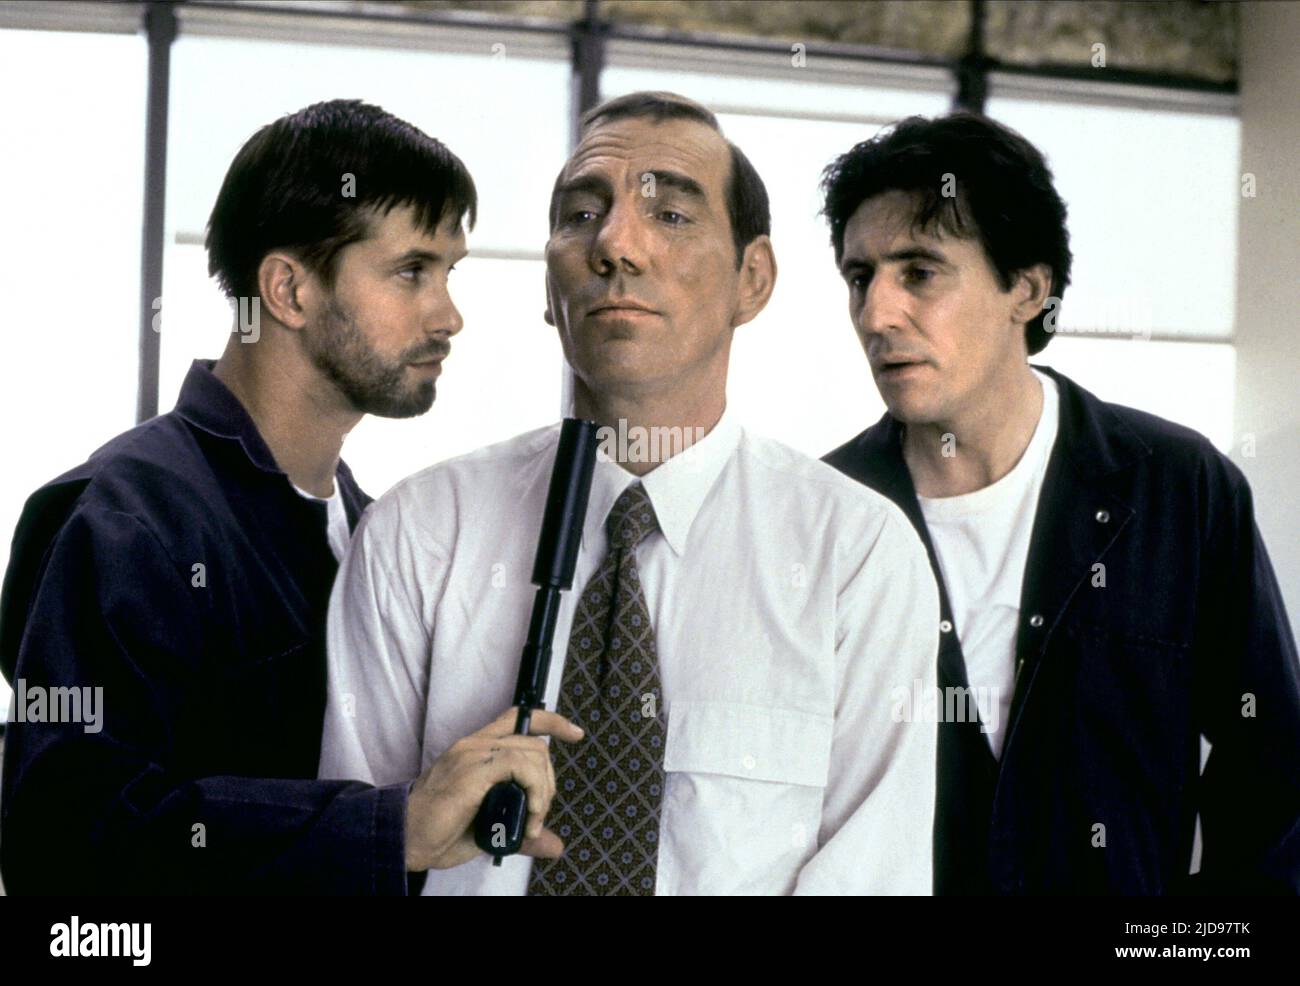 BALDWIN,POSTLETHWAITE,BYRNE, THE USUAL SUSPECTS, 1995, Stock Photo